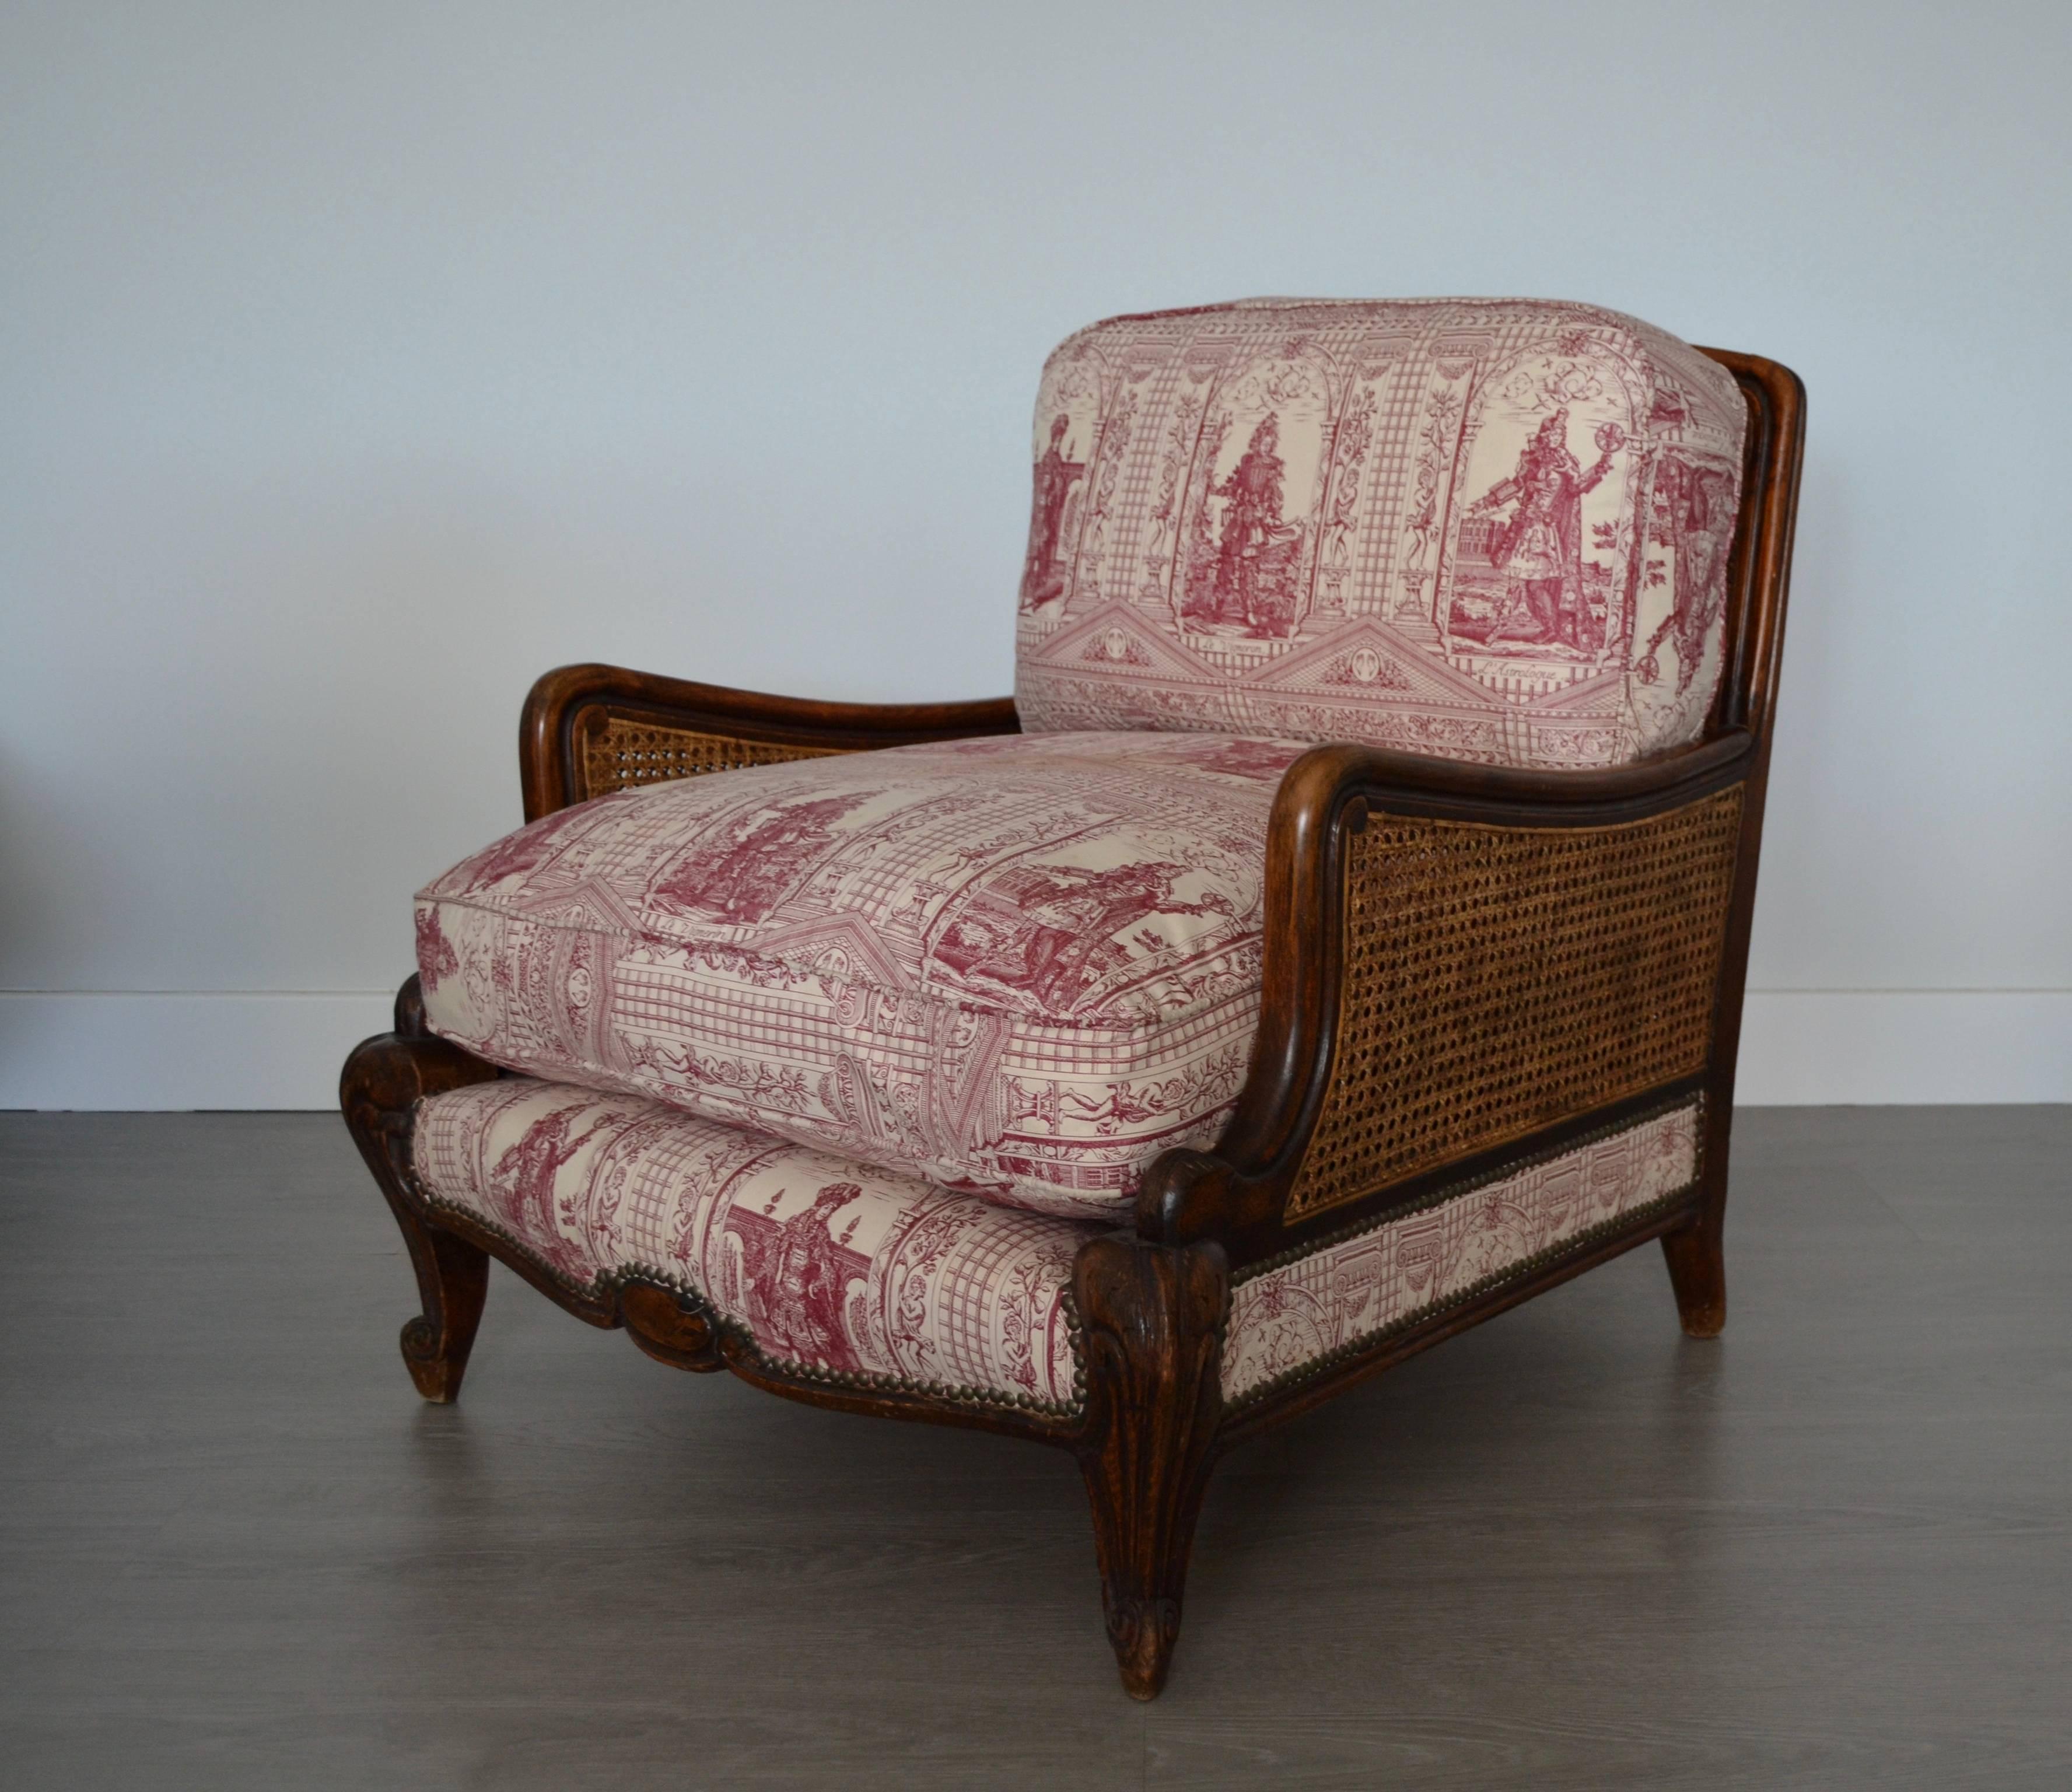 Wood and wicker armchair upholstered with toile de jouy, 1900.
Good vintage condition.